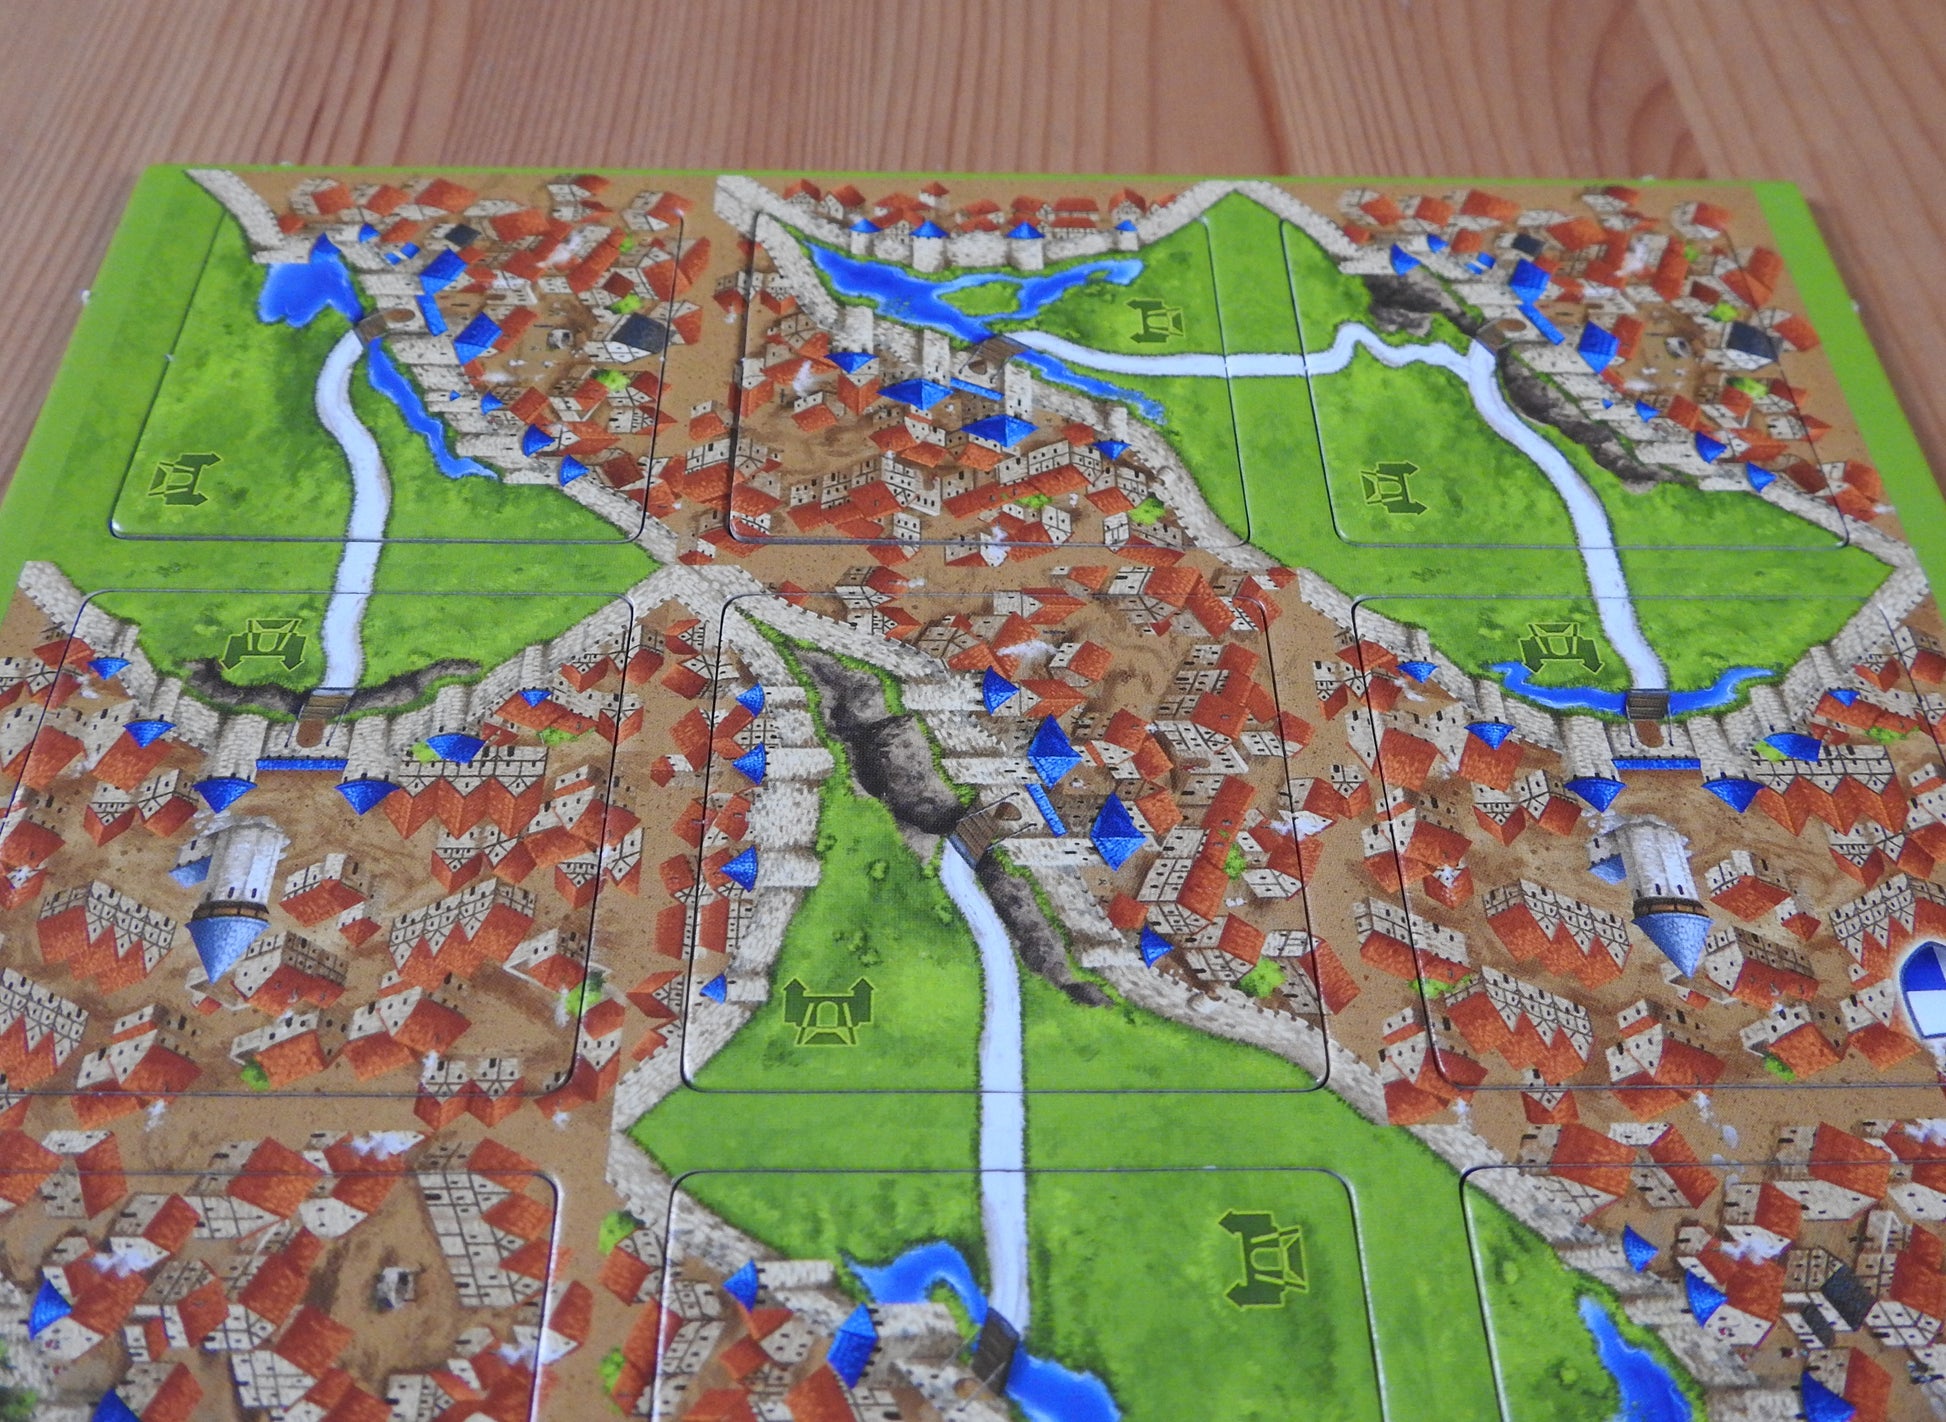 Close-up view of the top 6 tiles in Carcassonne Drawbridges.